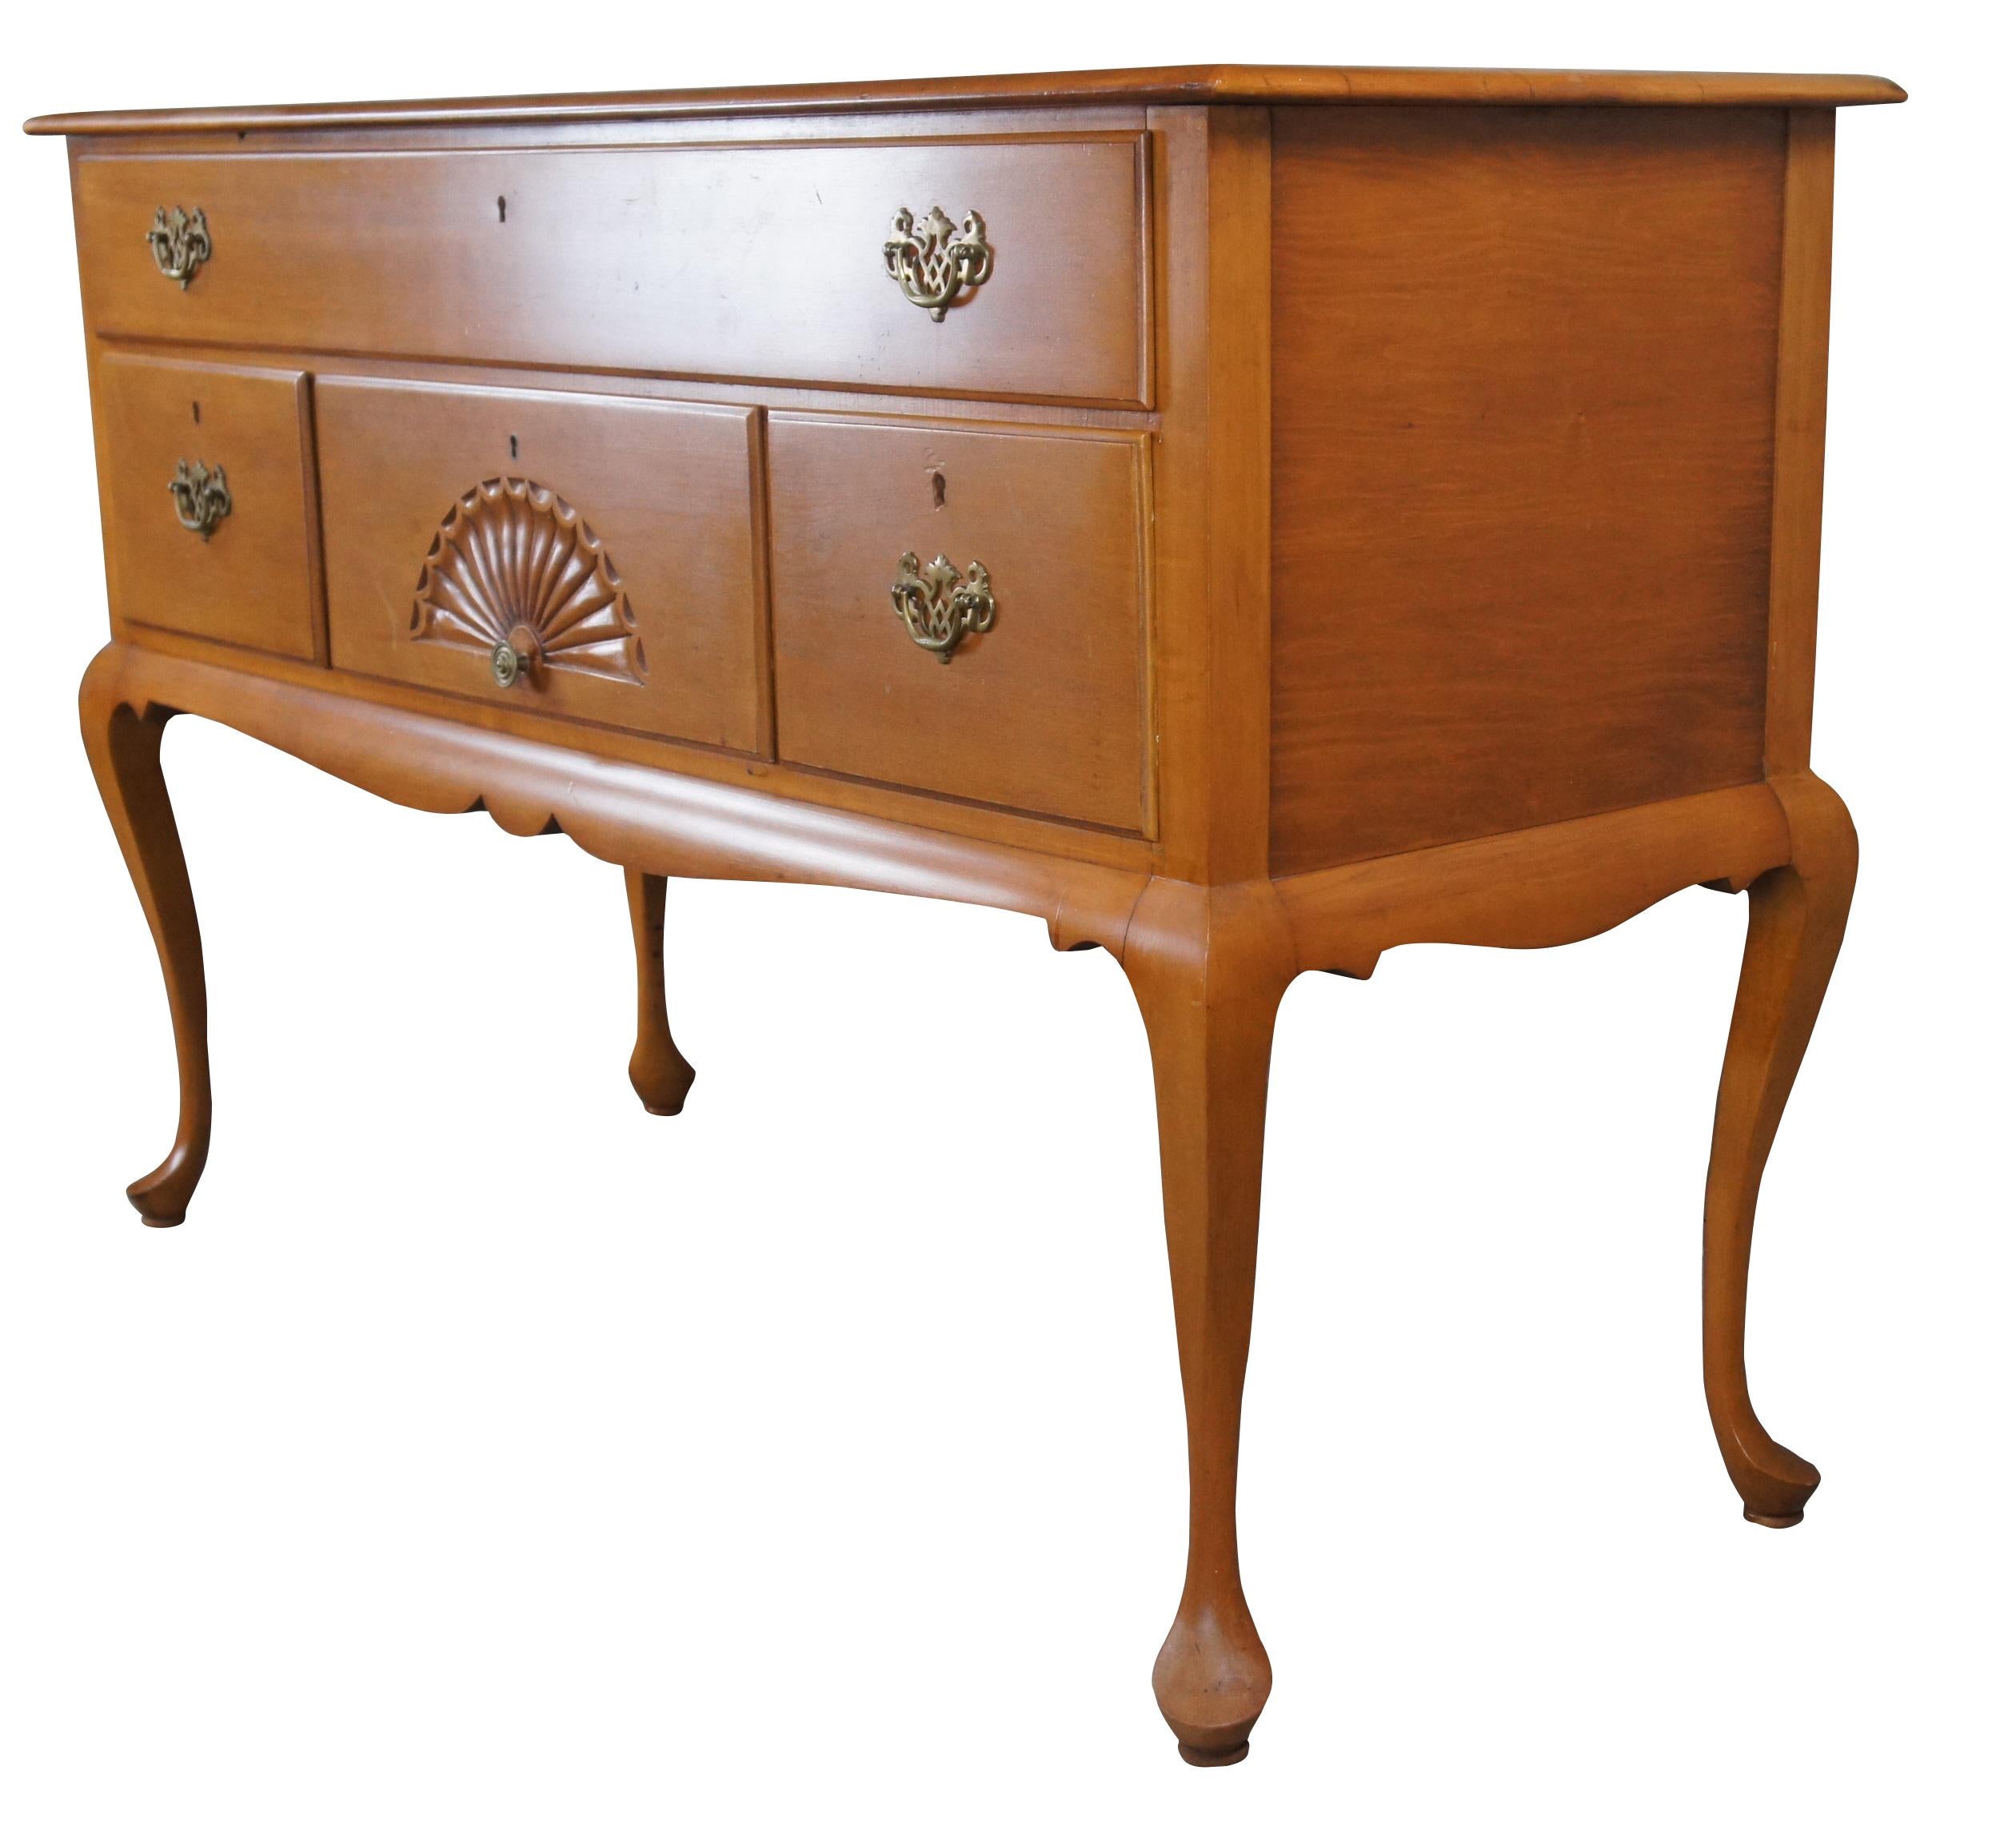 Antique Old Meeting House Queen Anne style buffet / sideboard / console / credenza.  Made of maple featuring rectangular form with four large drawers, brass hardware, serpentine skirt and slipper feet.

Winchendon Furniture Corporation
Founded: In